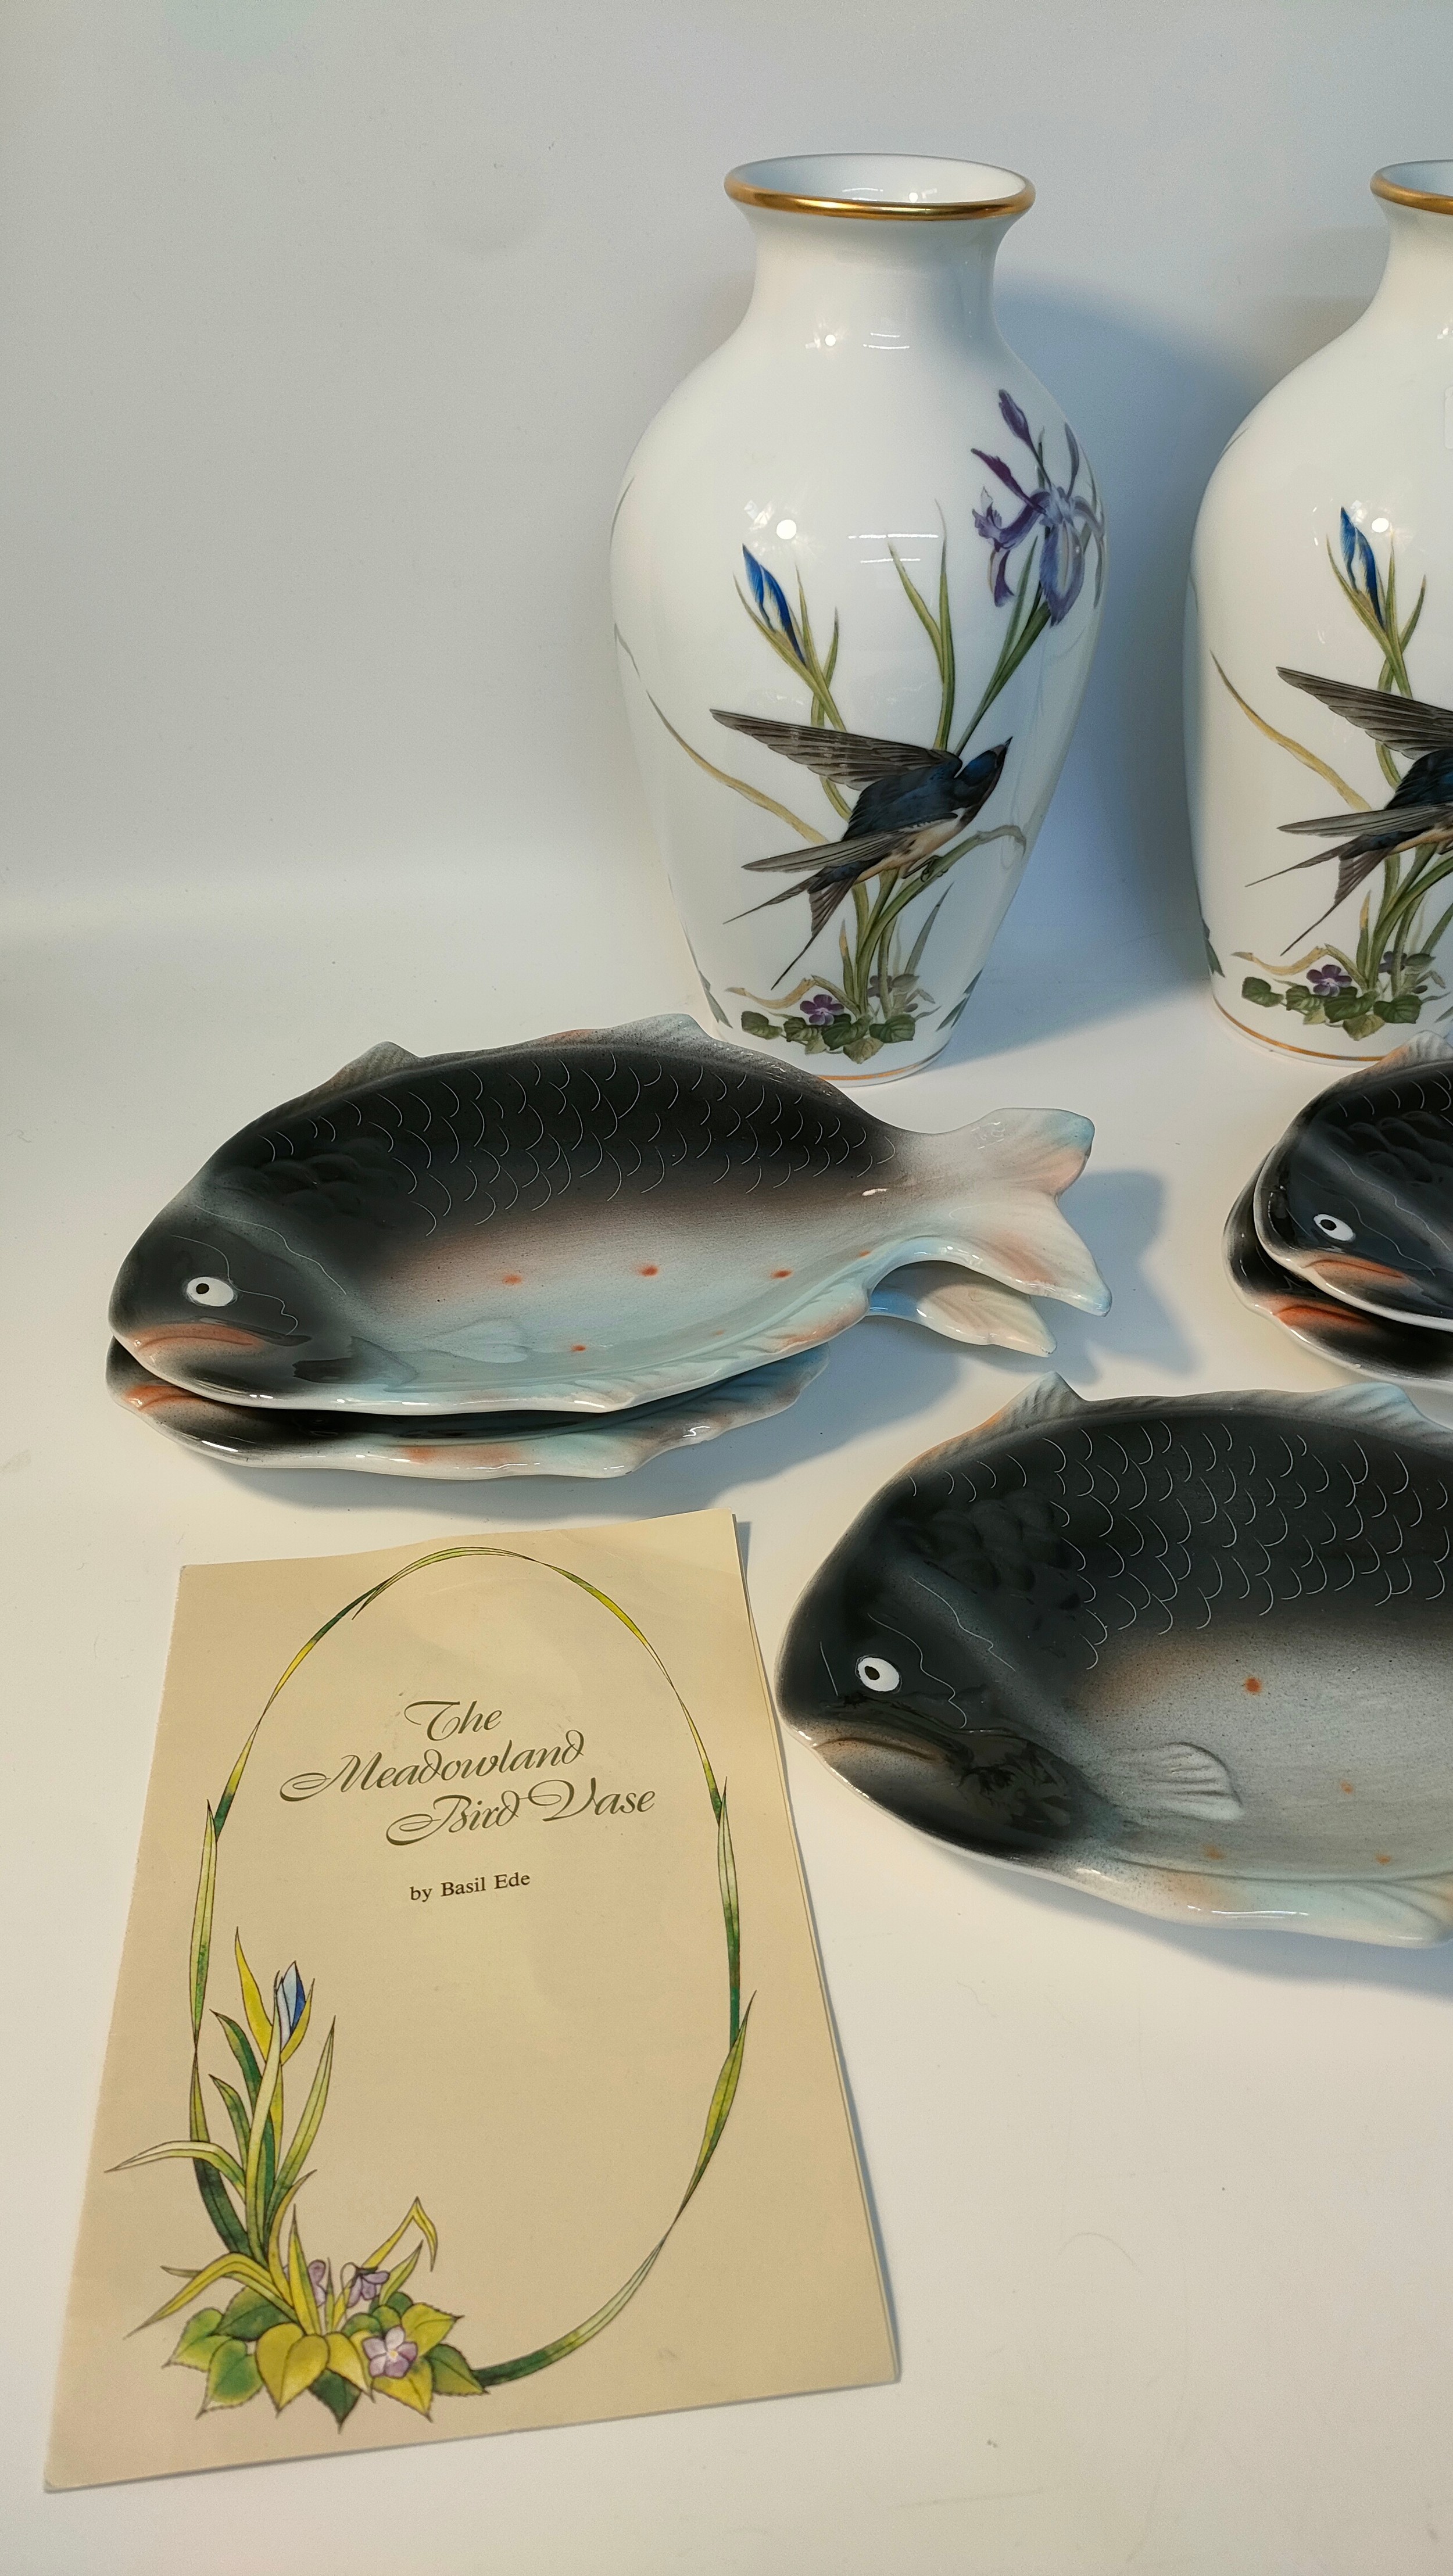 A Pair of Franklin mint 'meadowland bird' Vases by Basil Ede with certificates along with collection - Image 3 of 3